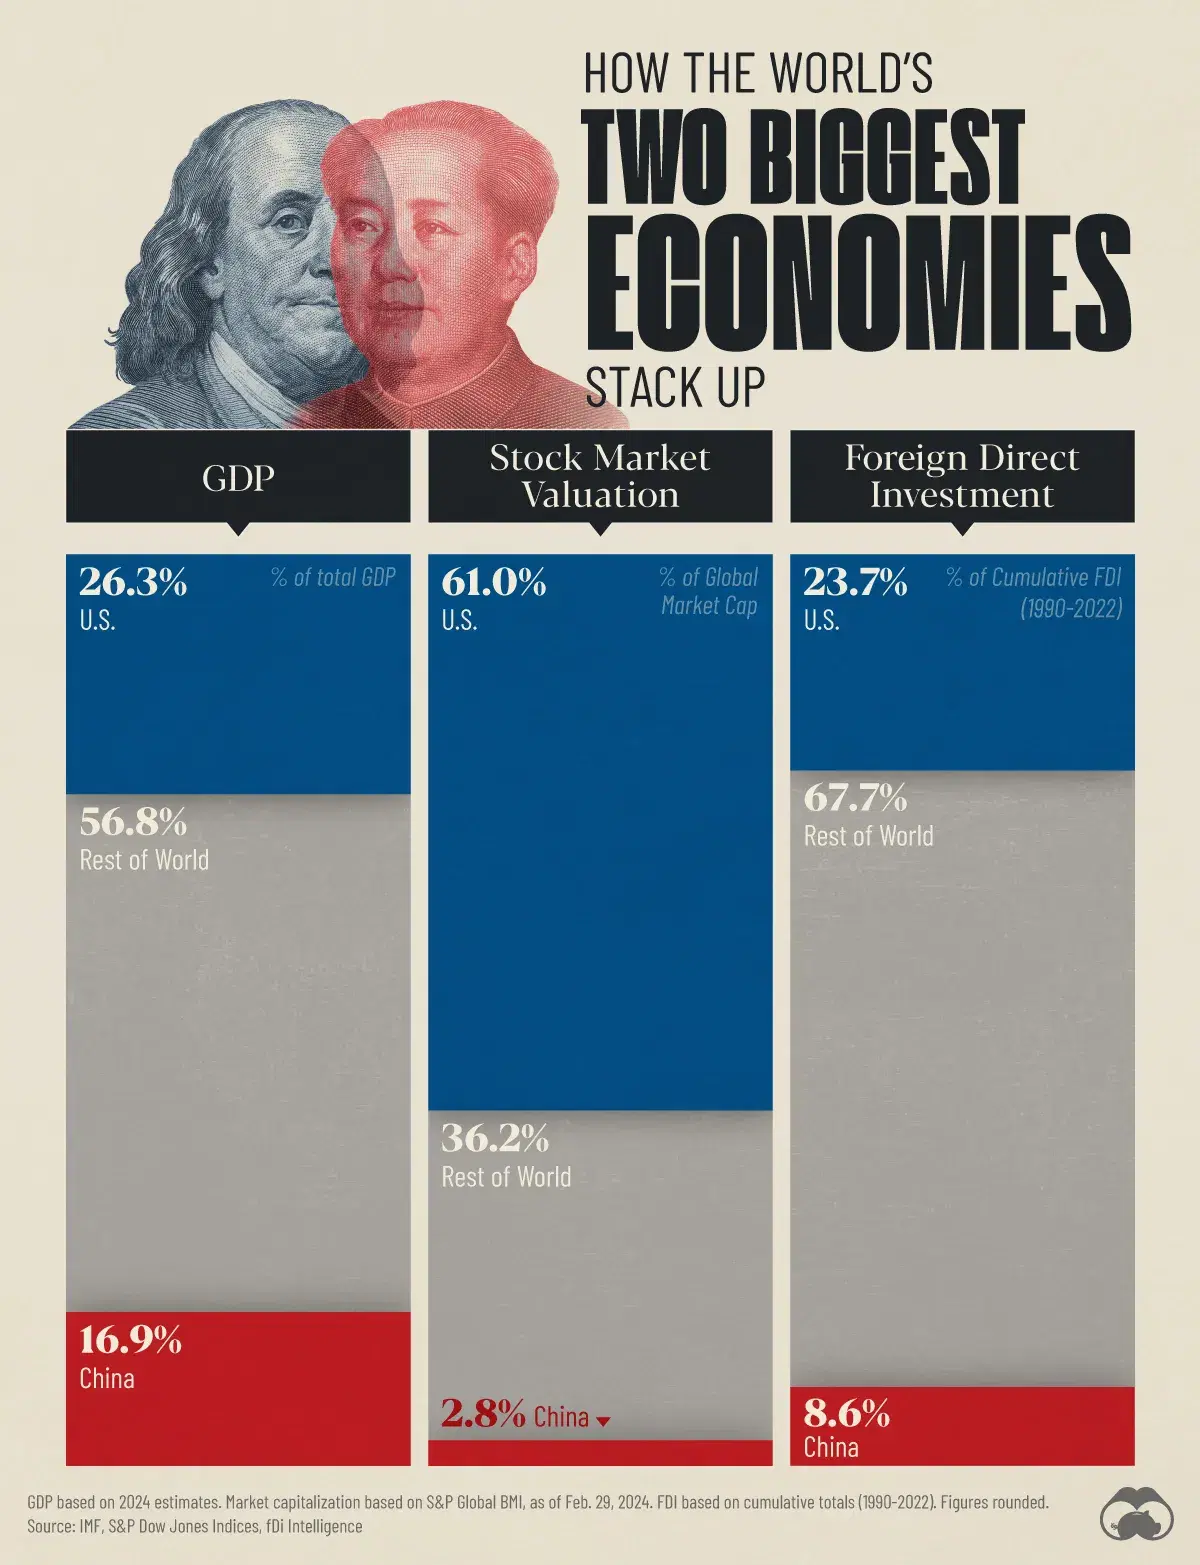 How the World’s Two Biggest Economies Stack Up